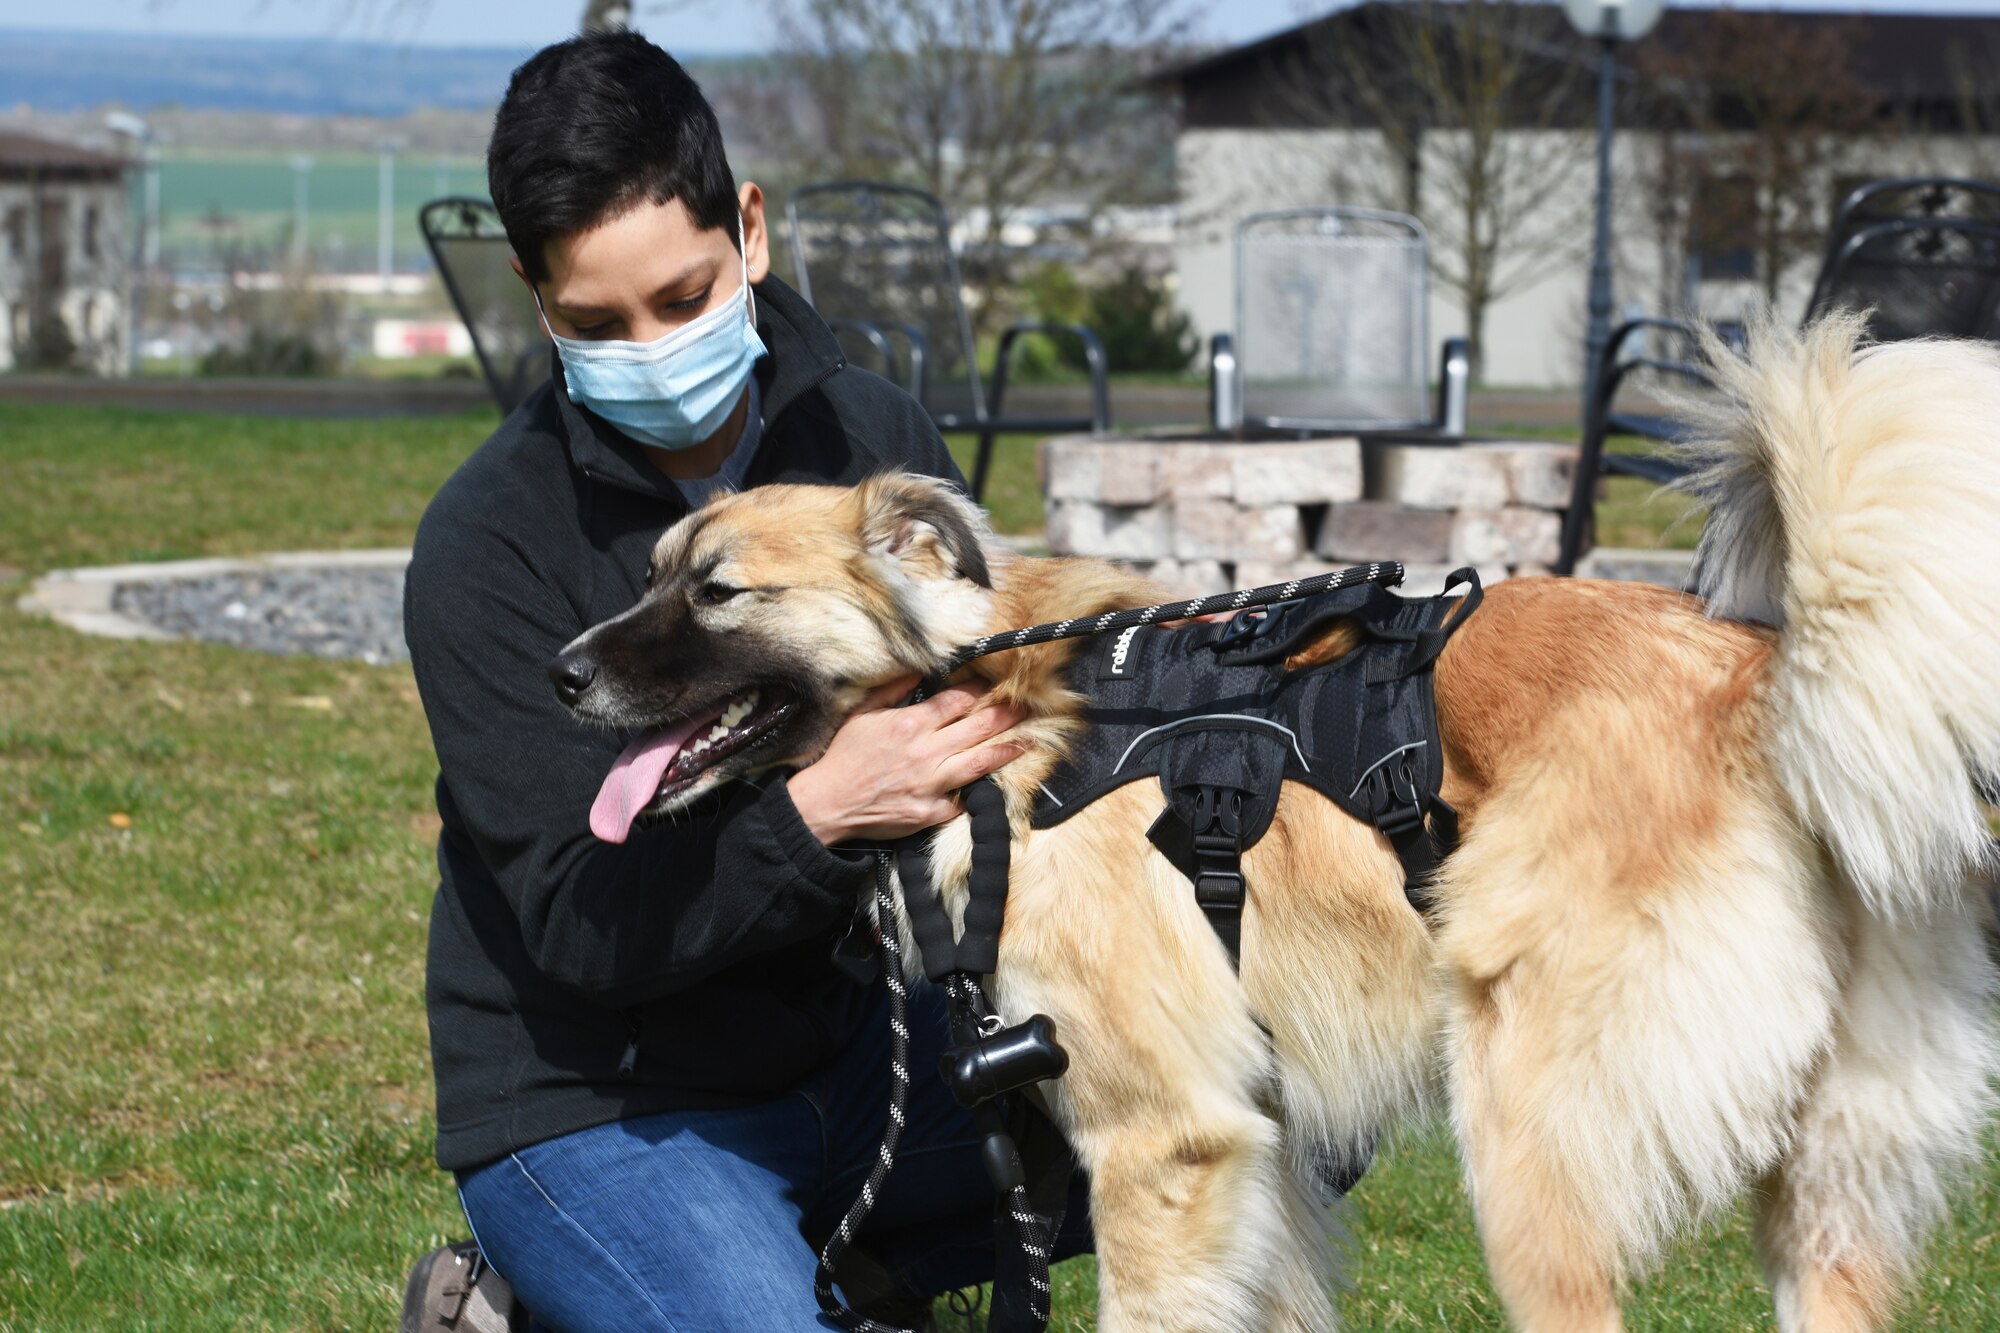 U.S. Air Force Capt. Milagros Gargurevich, 52nd Medical Group clinical psychologist pets her dog Remi at Spangdahlem Air Base, Germany, April 2, 2021. Gargurevich and Remi both assist with the Dogs in the Dorms program, which is designed to provide junior enlisted members stress relief and boost morale by allowing them an opportunity to pet and walk the dogs. (U.S. Air Force photo by Tech. Sergeant Tony Plyler)